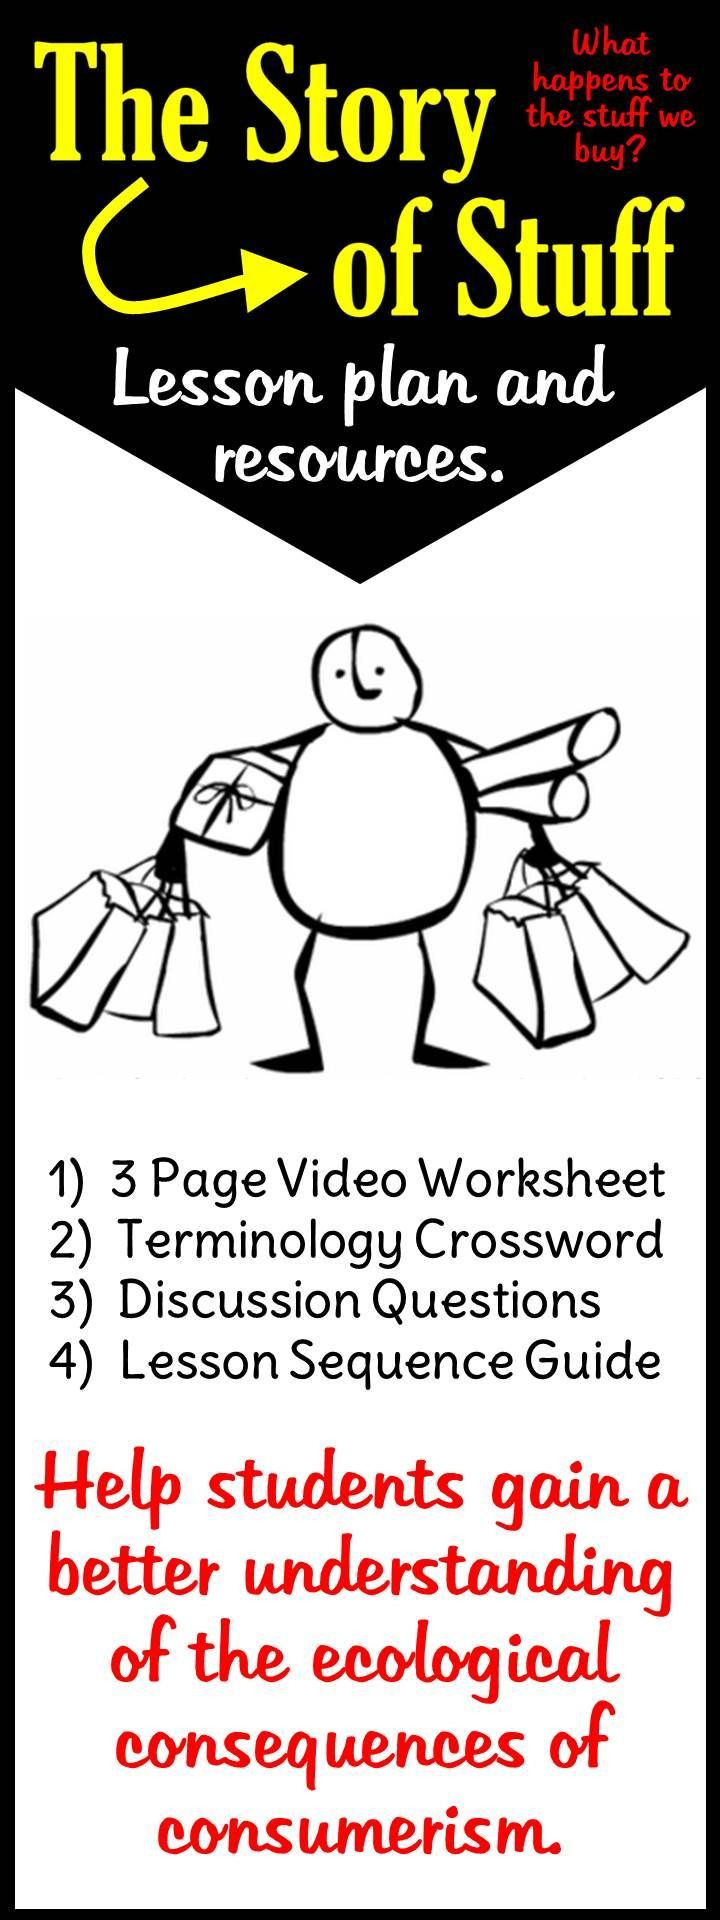 The Story Of Stuff Worksheet the Story Of Stuff Worksheet Crossword and Discussion